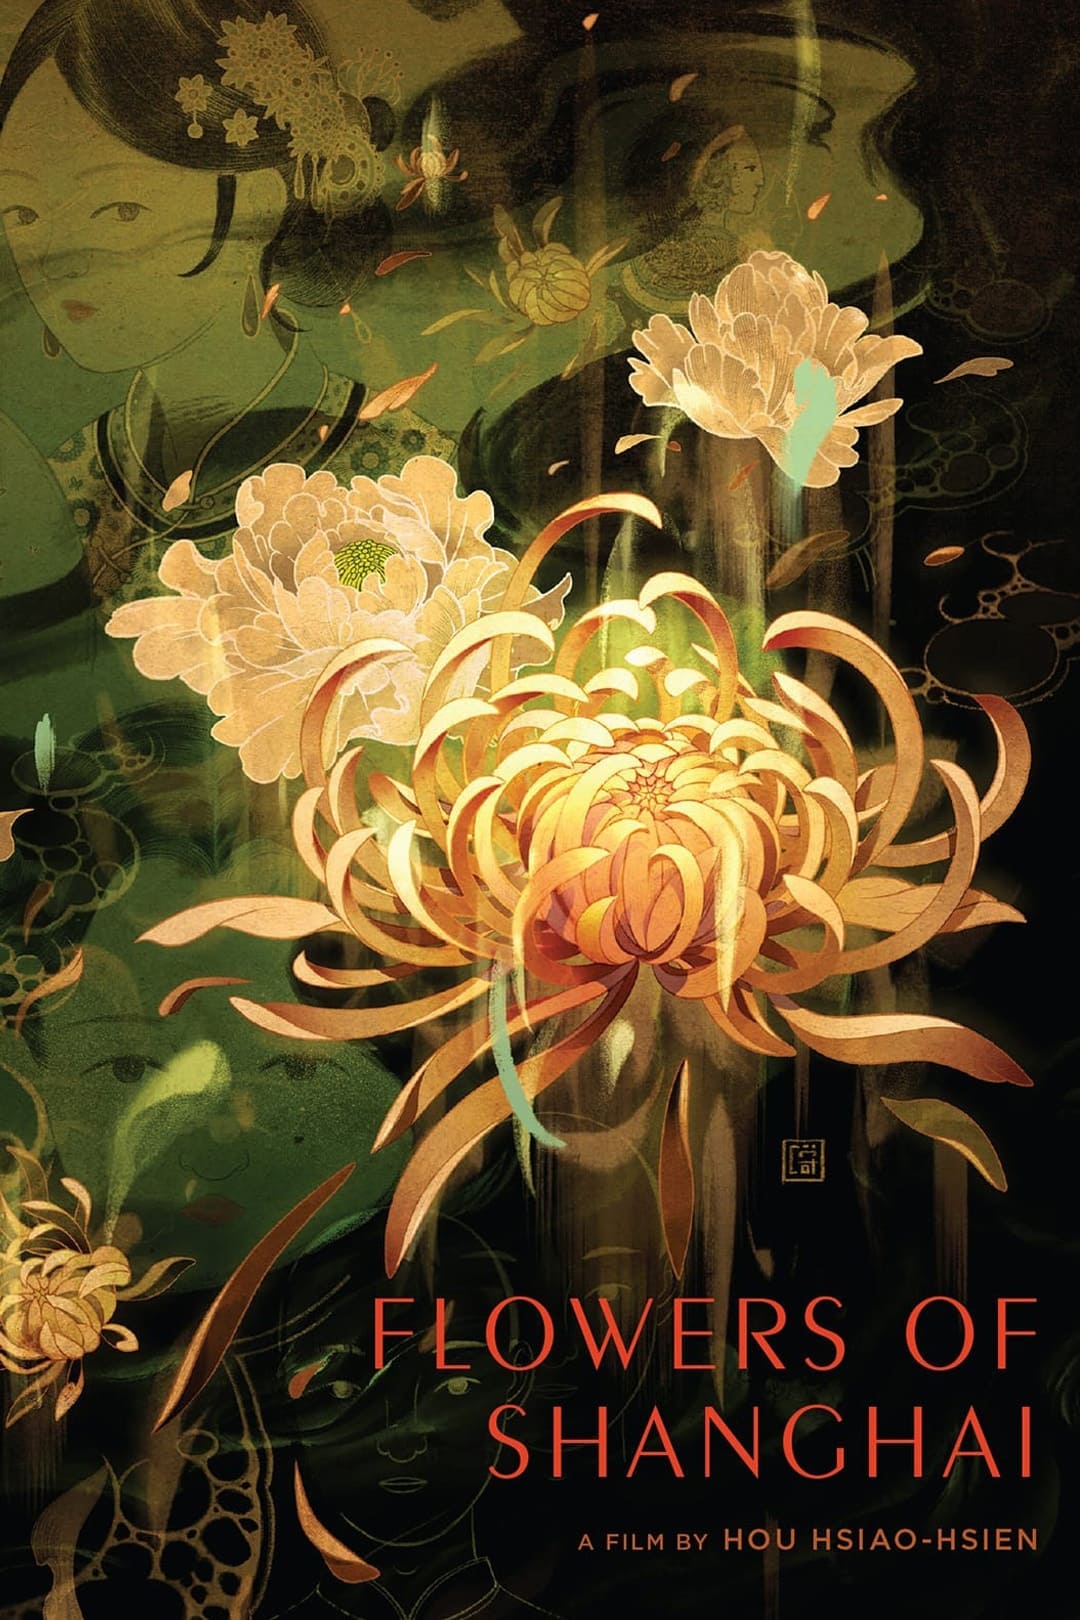 Beautified Realism: The Making of 'Flowers of Shanghai'